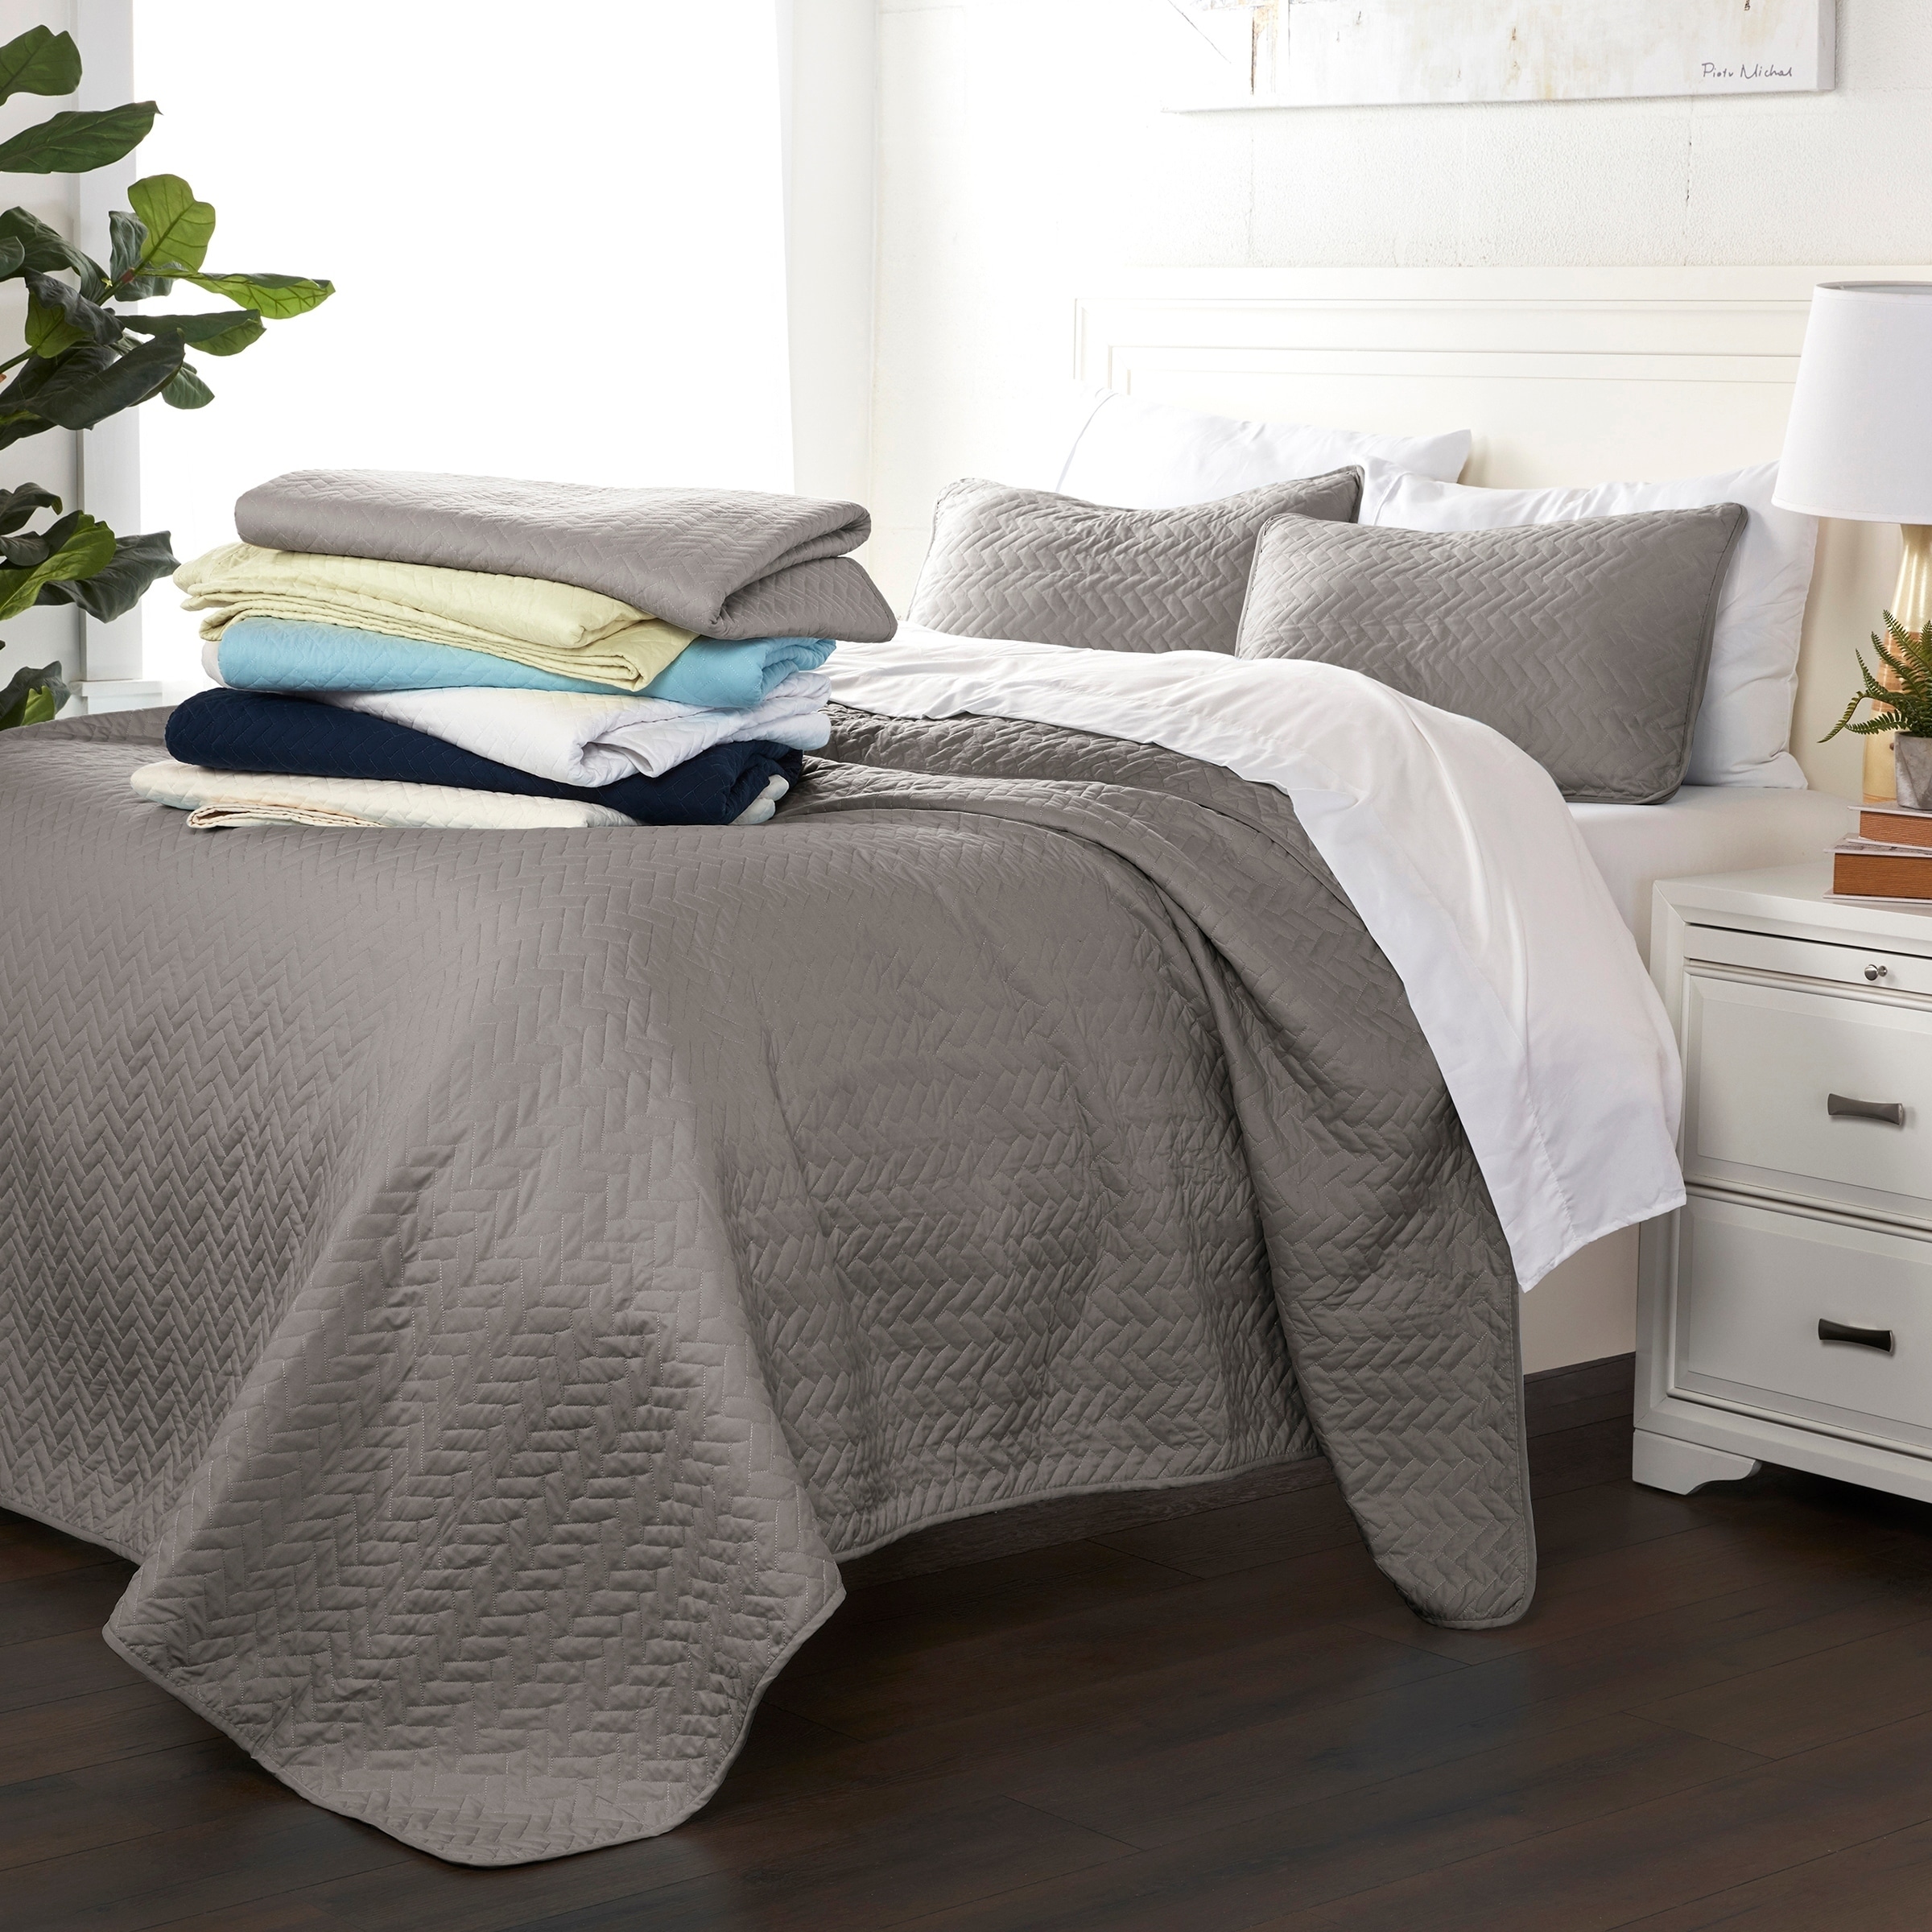 Shop Luxury Ultra Soft Herring Quilted Coverlet Set By Sharon